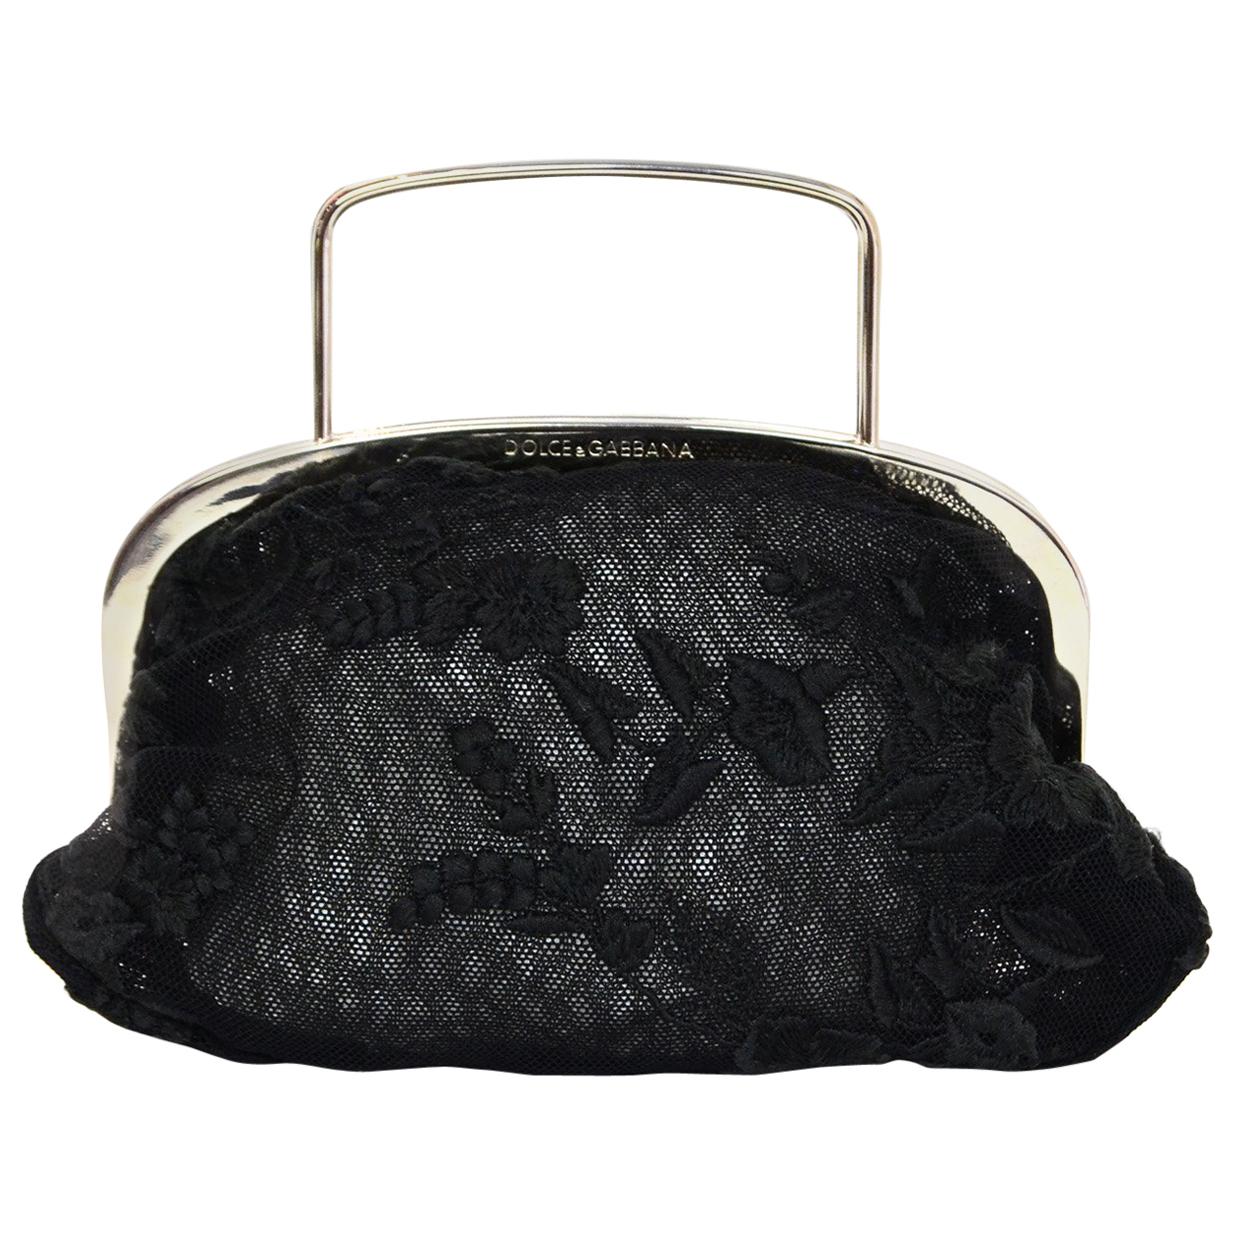 Dolce & Gabbana Black Sheer Floral Lace Top Handle Mini Bag with Dust Bag